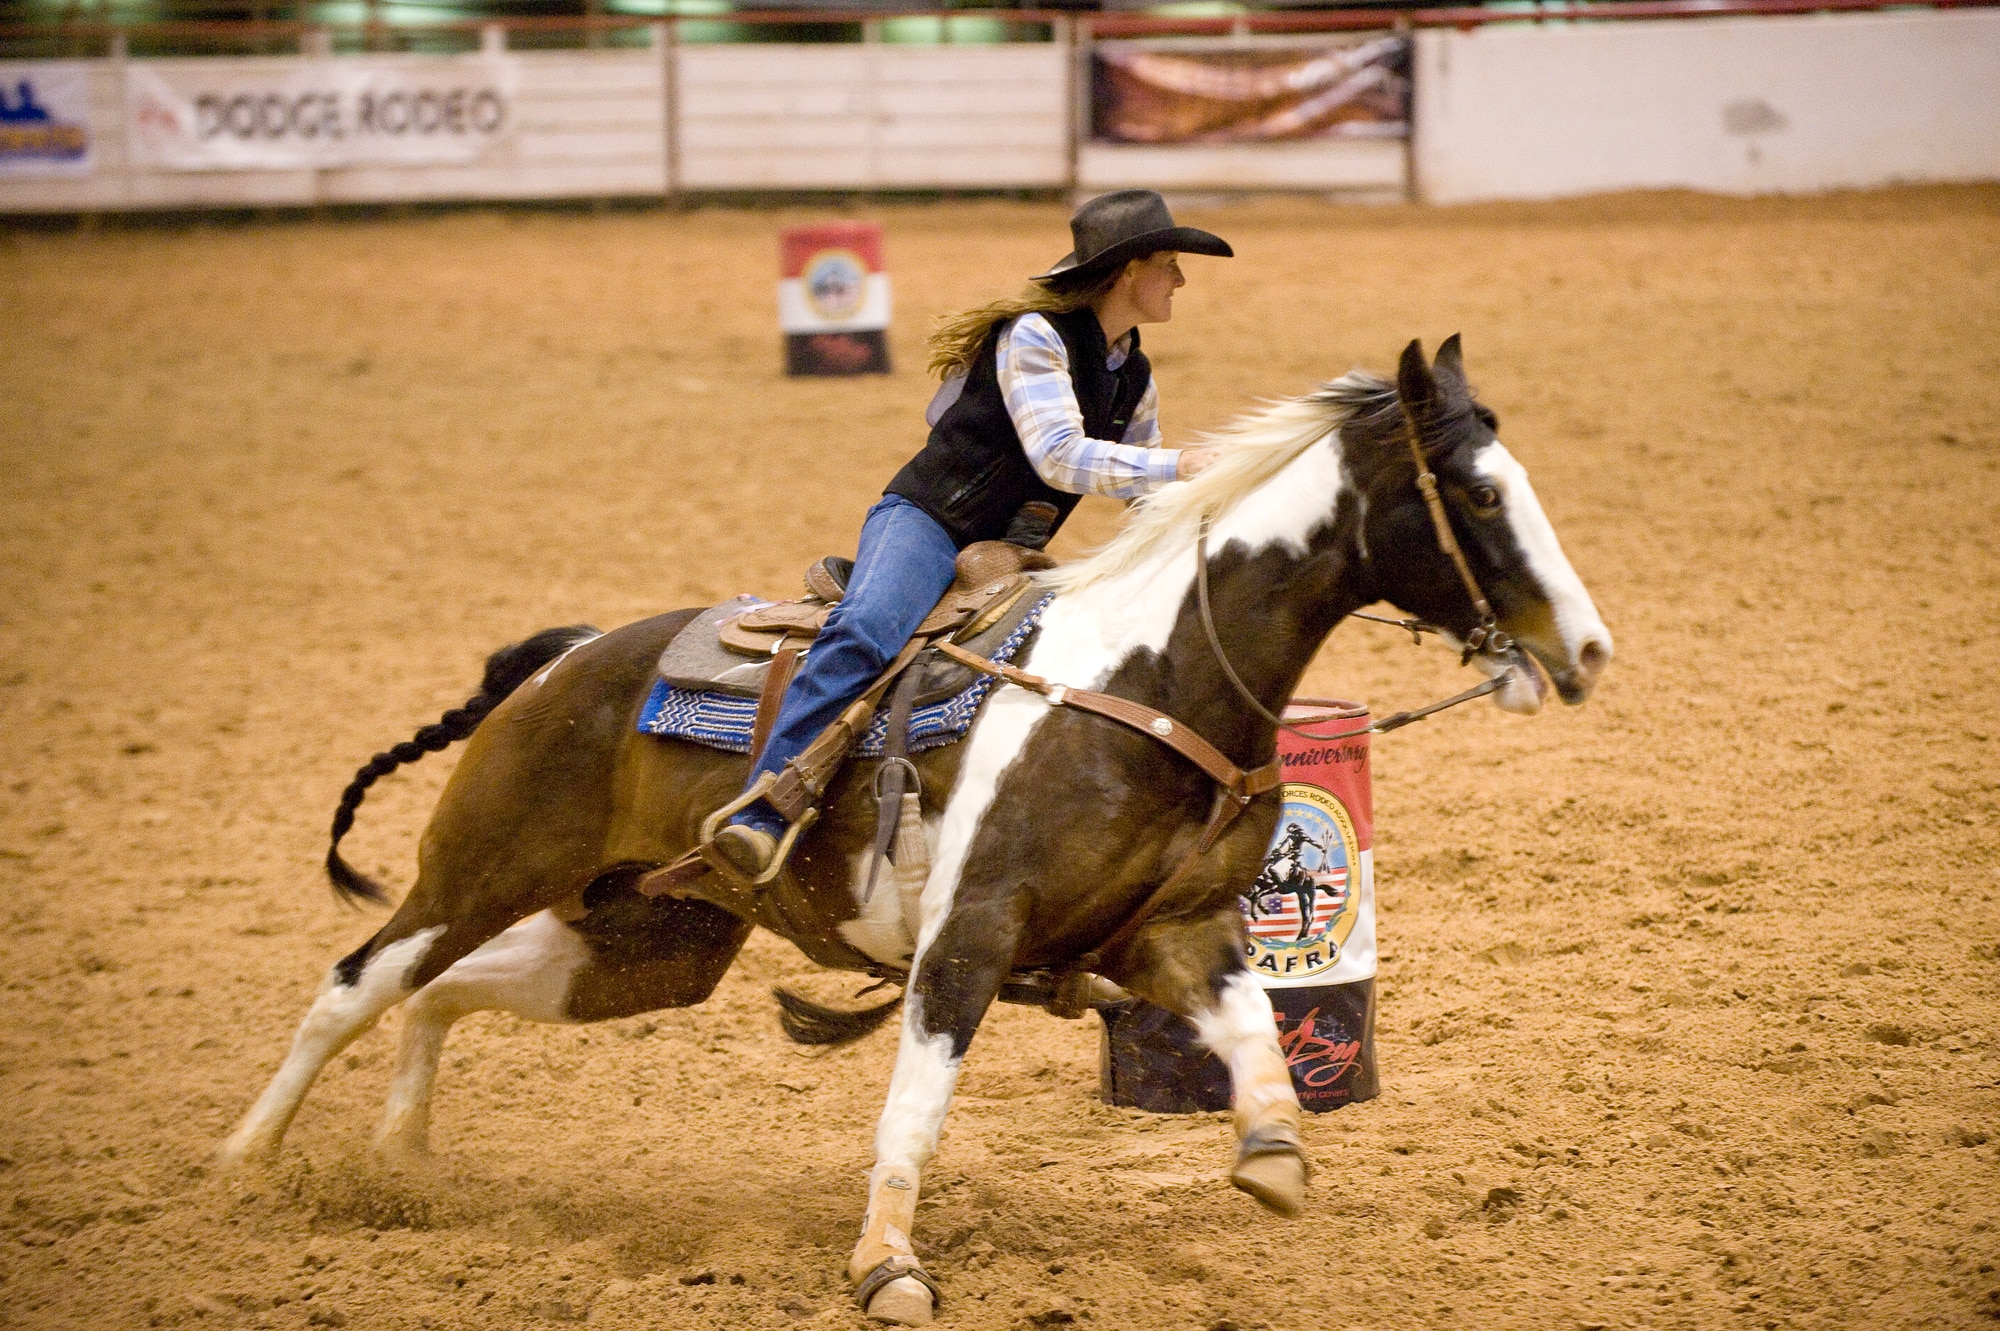 Lt. Col. Val Baker rounds the second barrel during the timed barrel racing competition at the Professional Armed Forces Rodeo Associations World Finals Nov. 20, 2010, in Glen Rose, Texas. Colonel Baker is stationed at Fort Huachuca, Ariz., and earned first place in the Woman's All-Around winning top honors in the rodeo while competing in five events. (U.S. Air Force photo/Master Sgt. Jack Braden)
